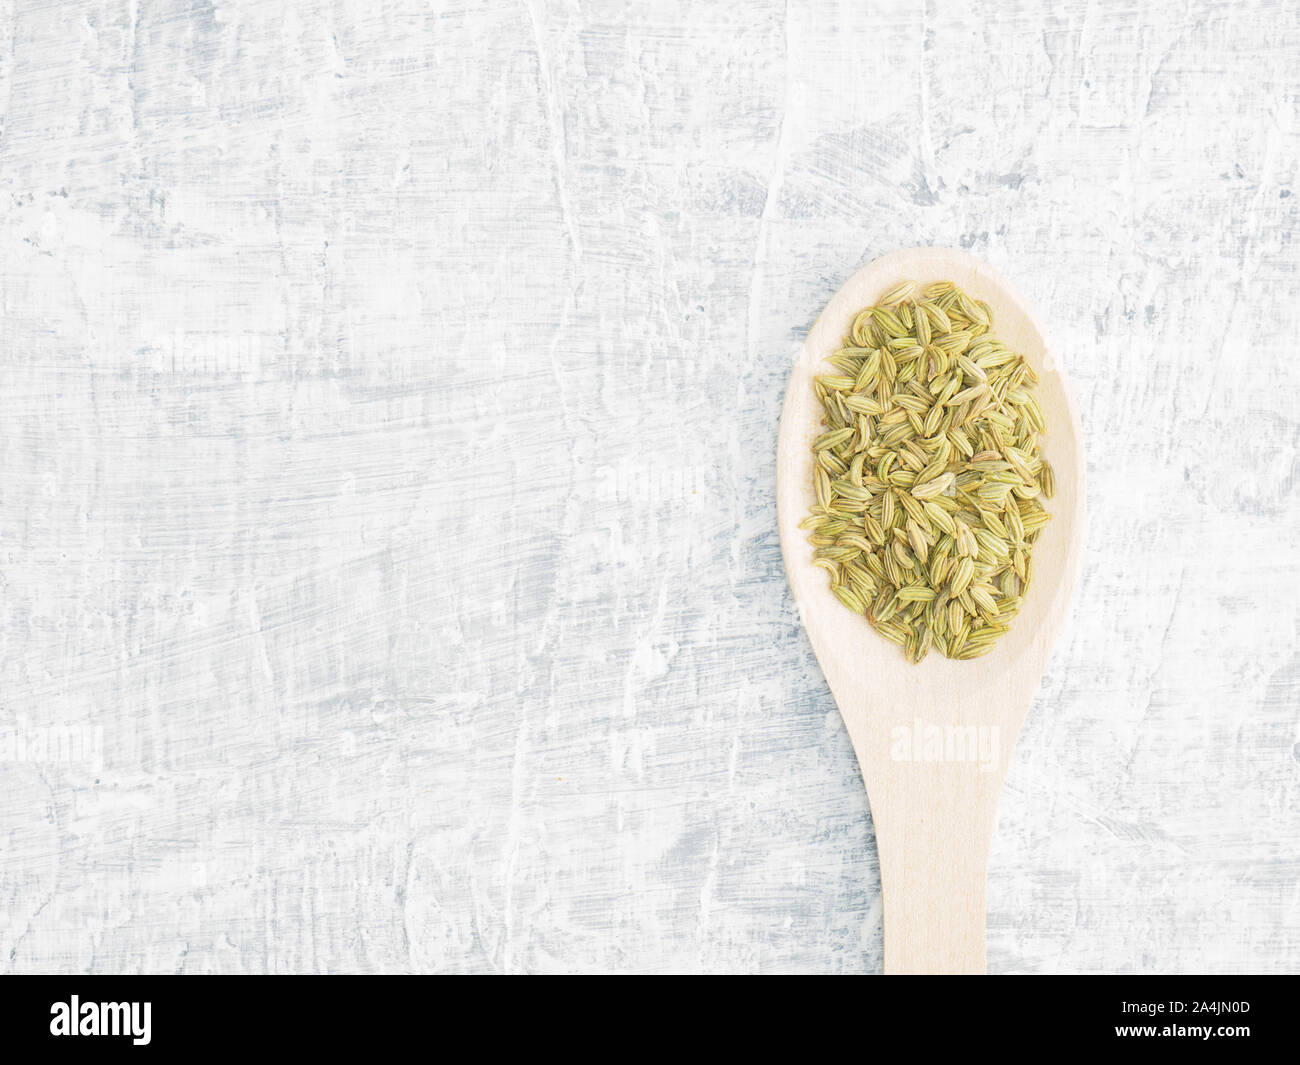 Spices and herbs help maintain good health and improve appetite, top view on white concrete background. Fennel in wooden spoon. Modern apothecary, nat Stock Photo